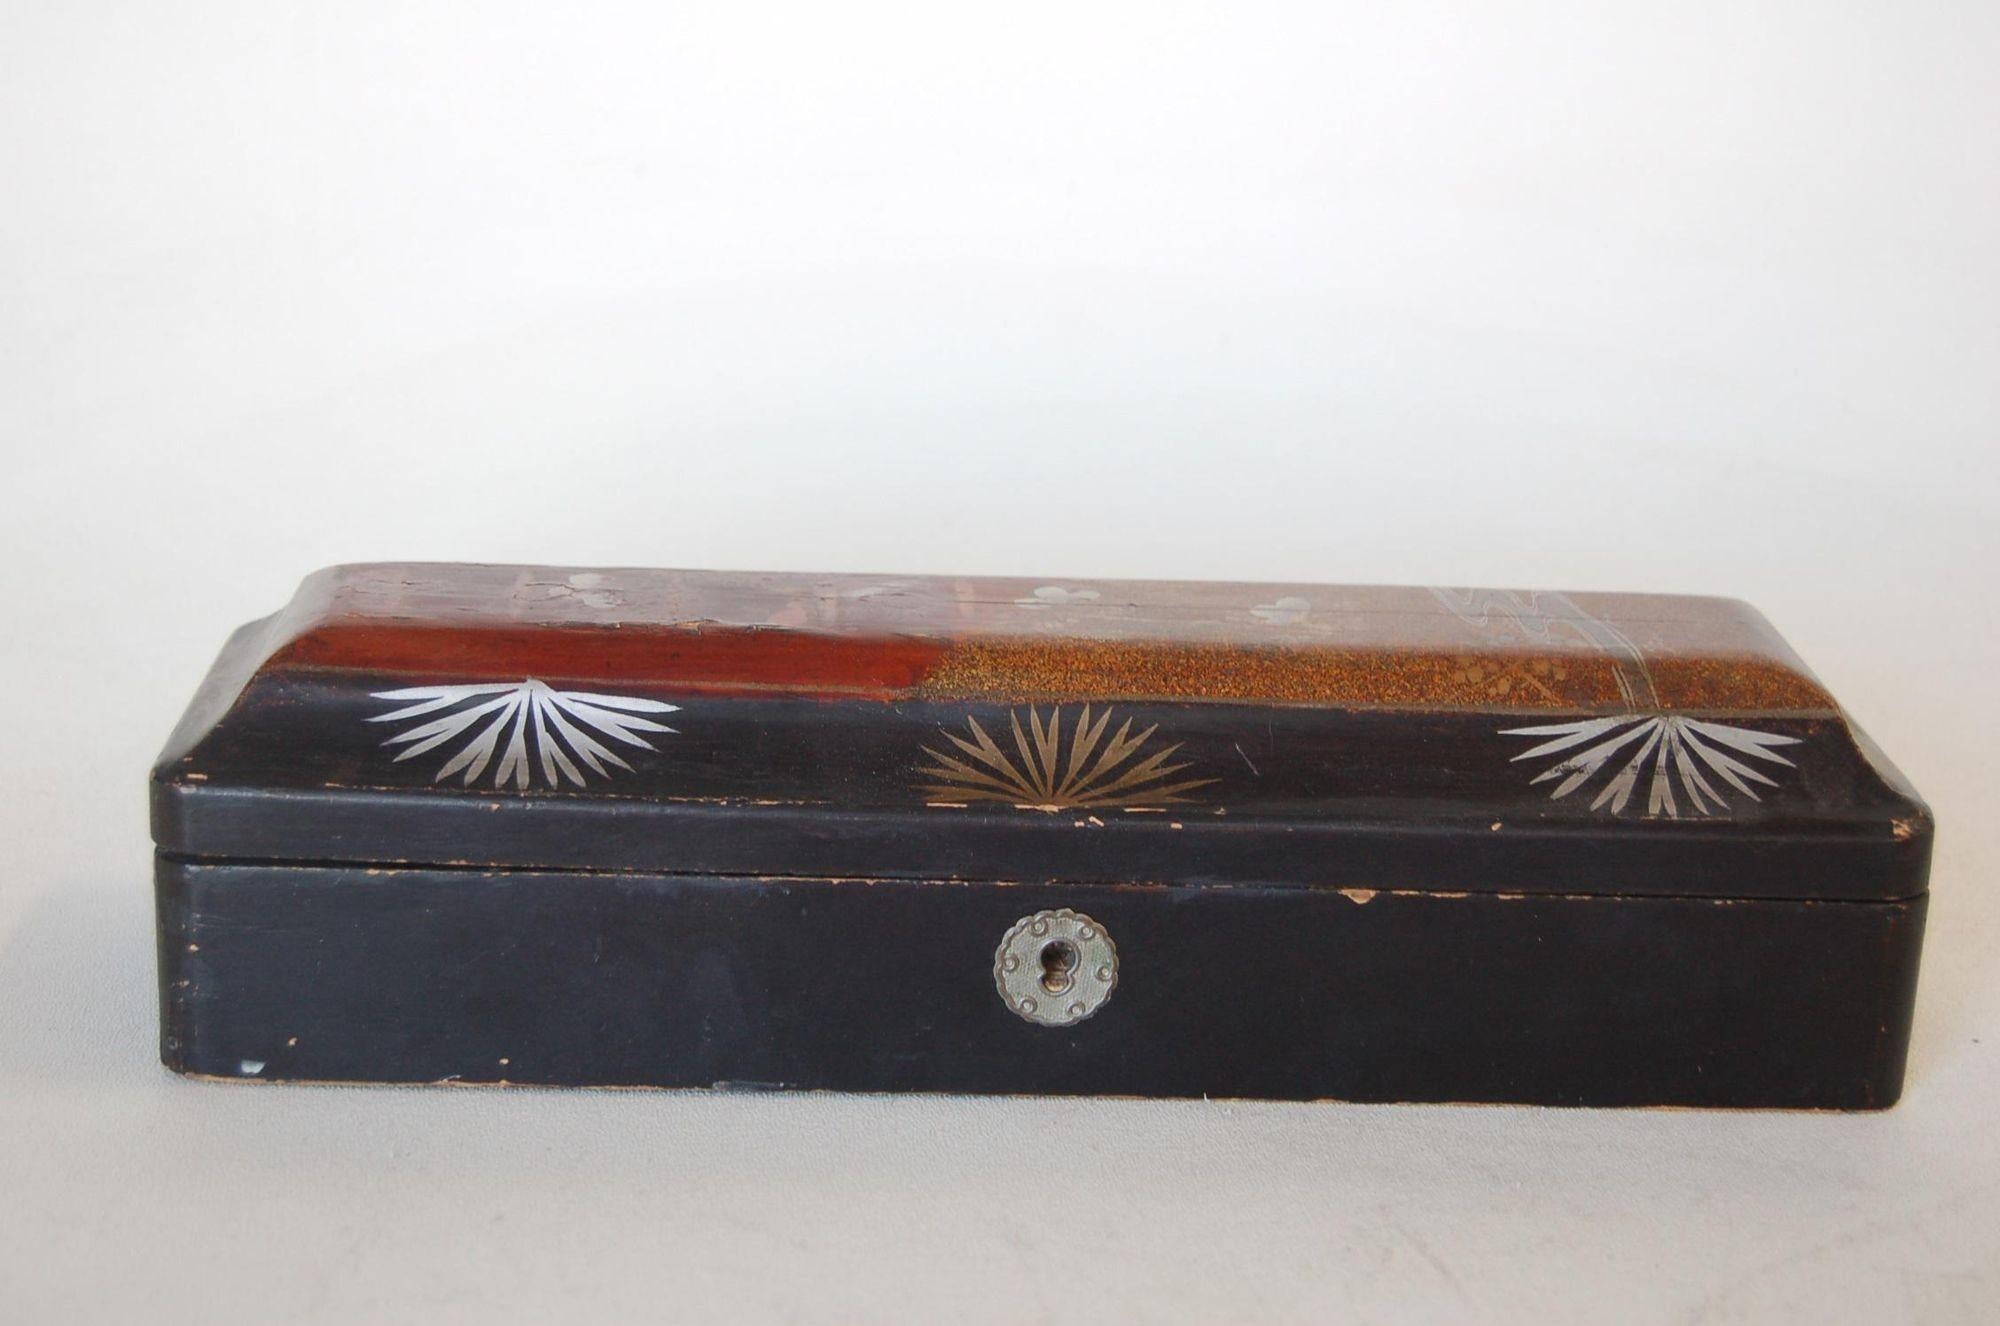 Antique Lacquered Japenese Wood Keepsake Trinket Box, circa 1920s In Excellent Condition For Sale In Van Nuys, CA